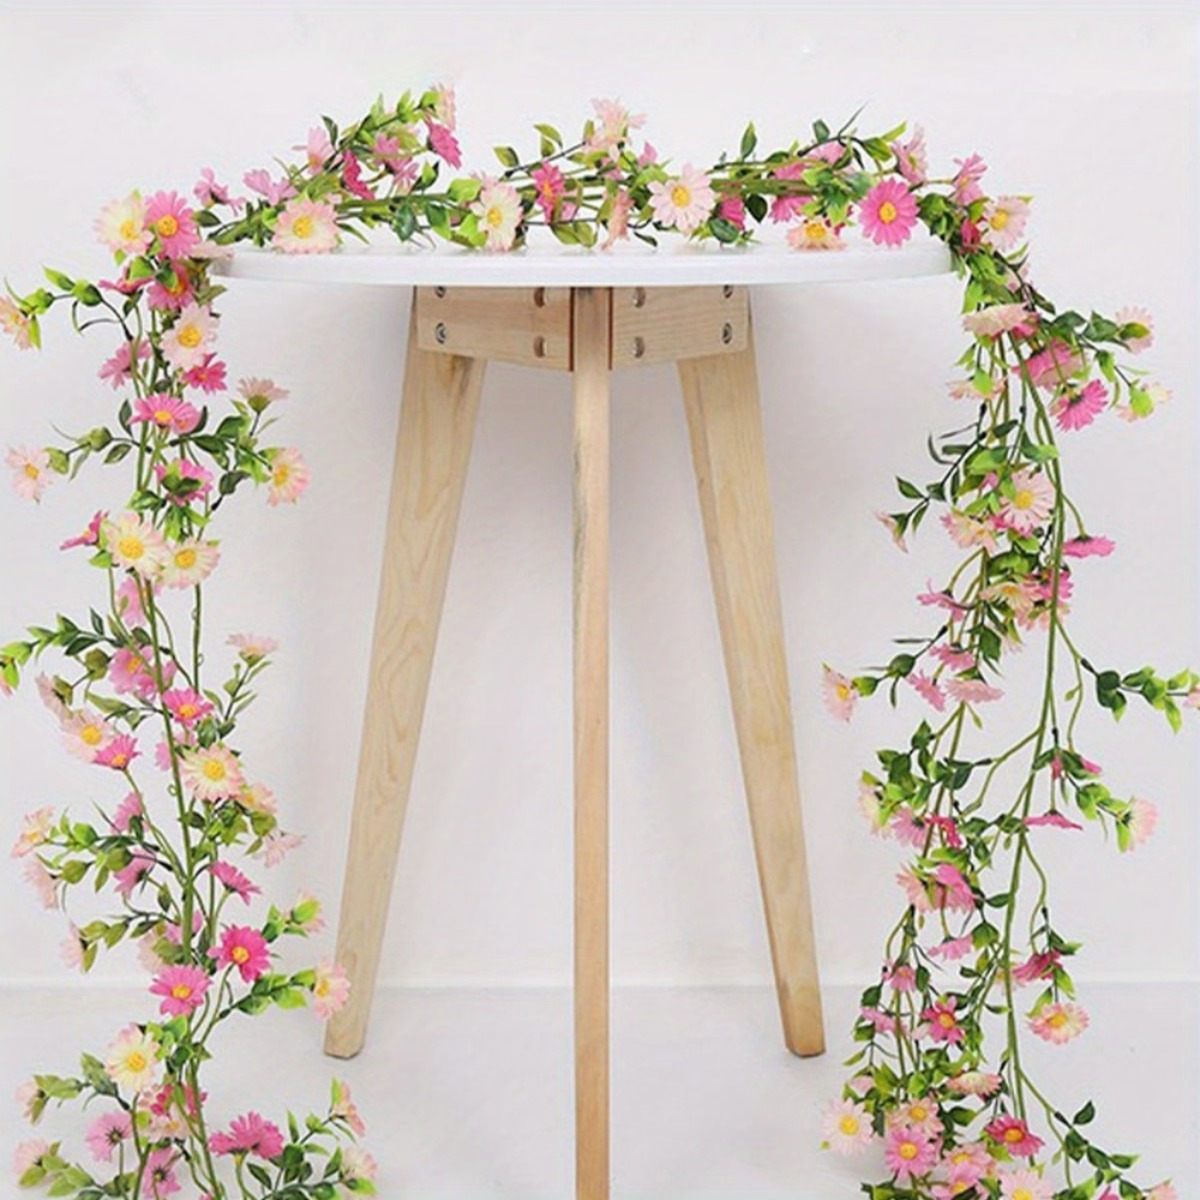 

3pcs 2.1m/6.9ft Artificial Daisy Vine Artificial Flower Silk Wildflower Garland Spring Fake Flower Vine Hanging Ivy For Wall Party Wedding Arch Floral Decor Home Indoor Outdoor